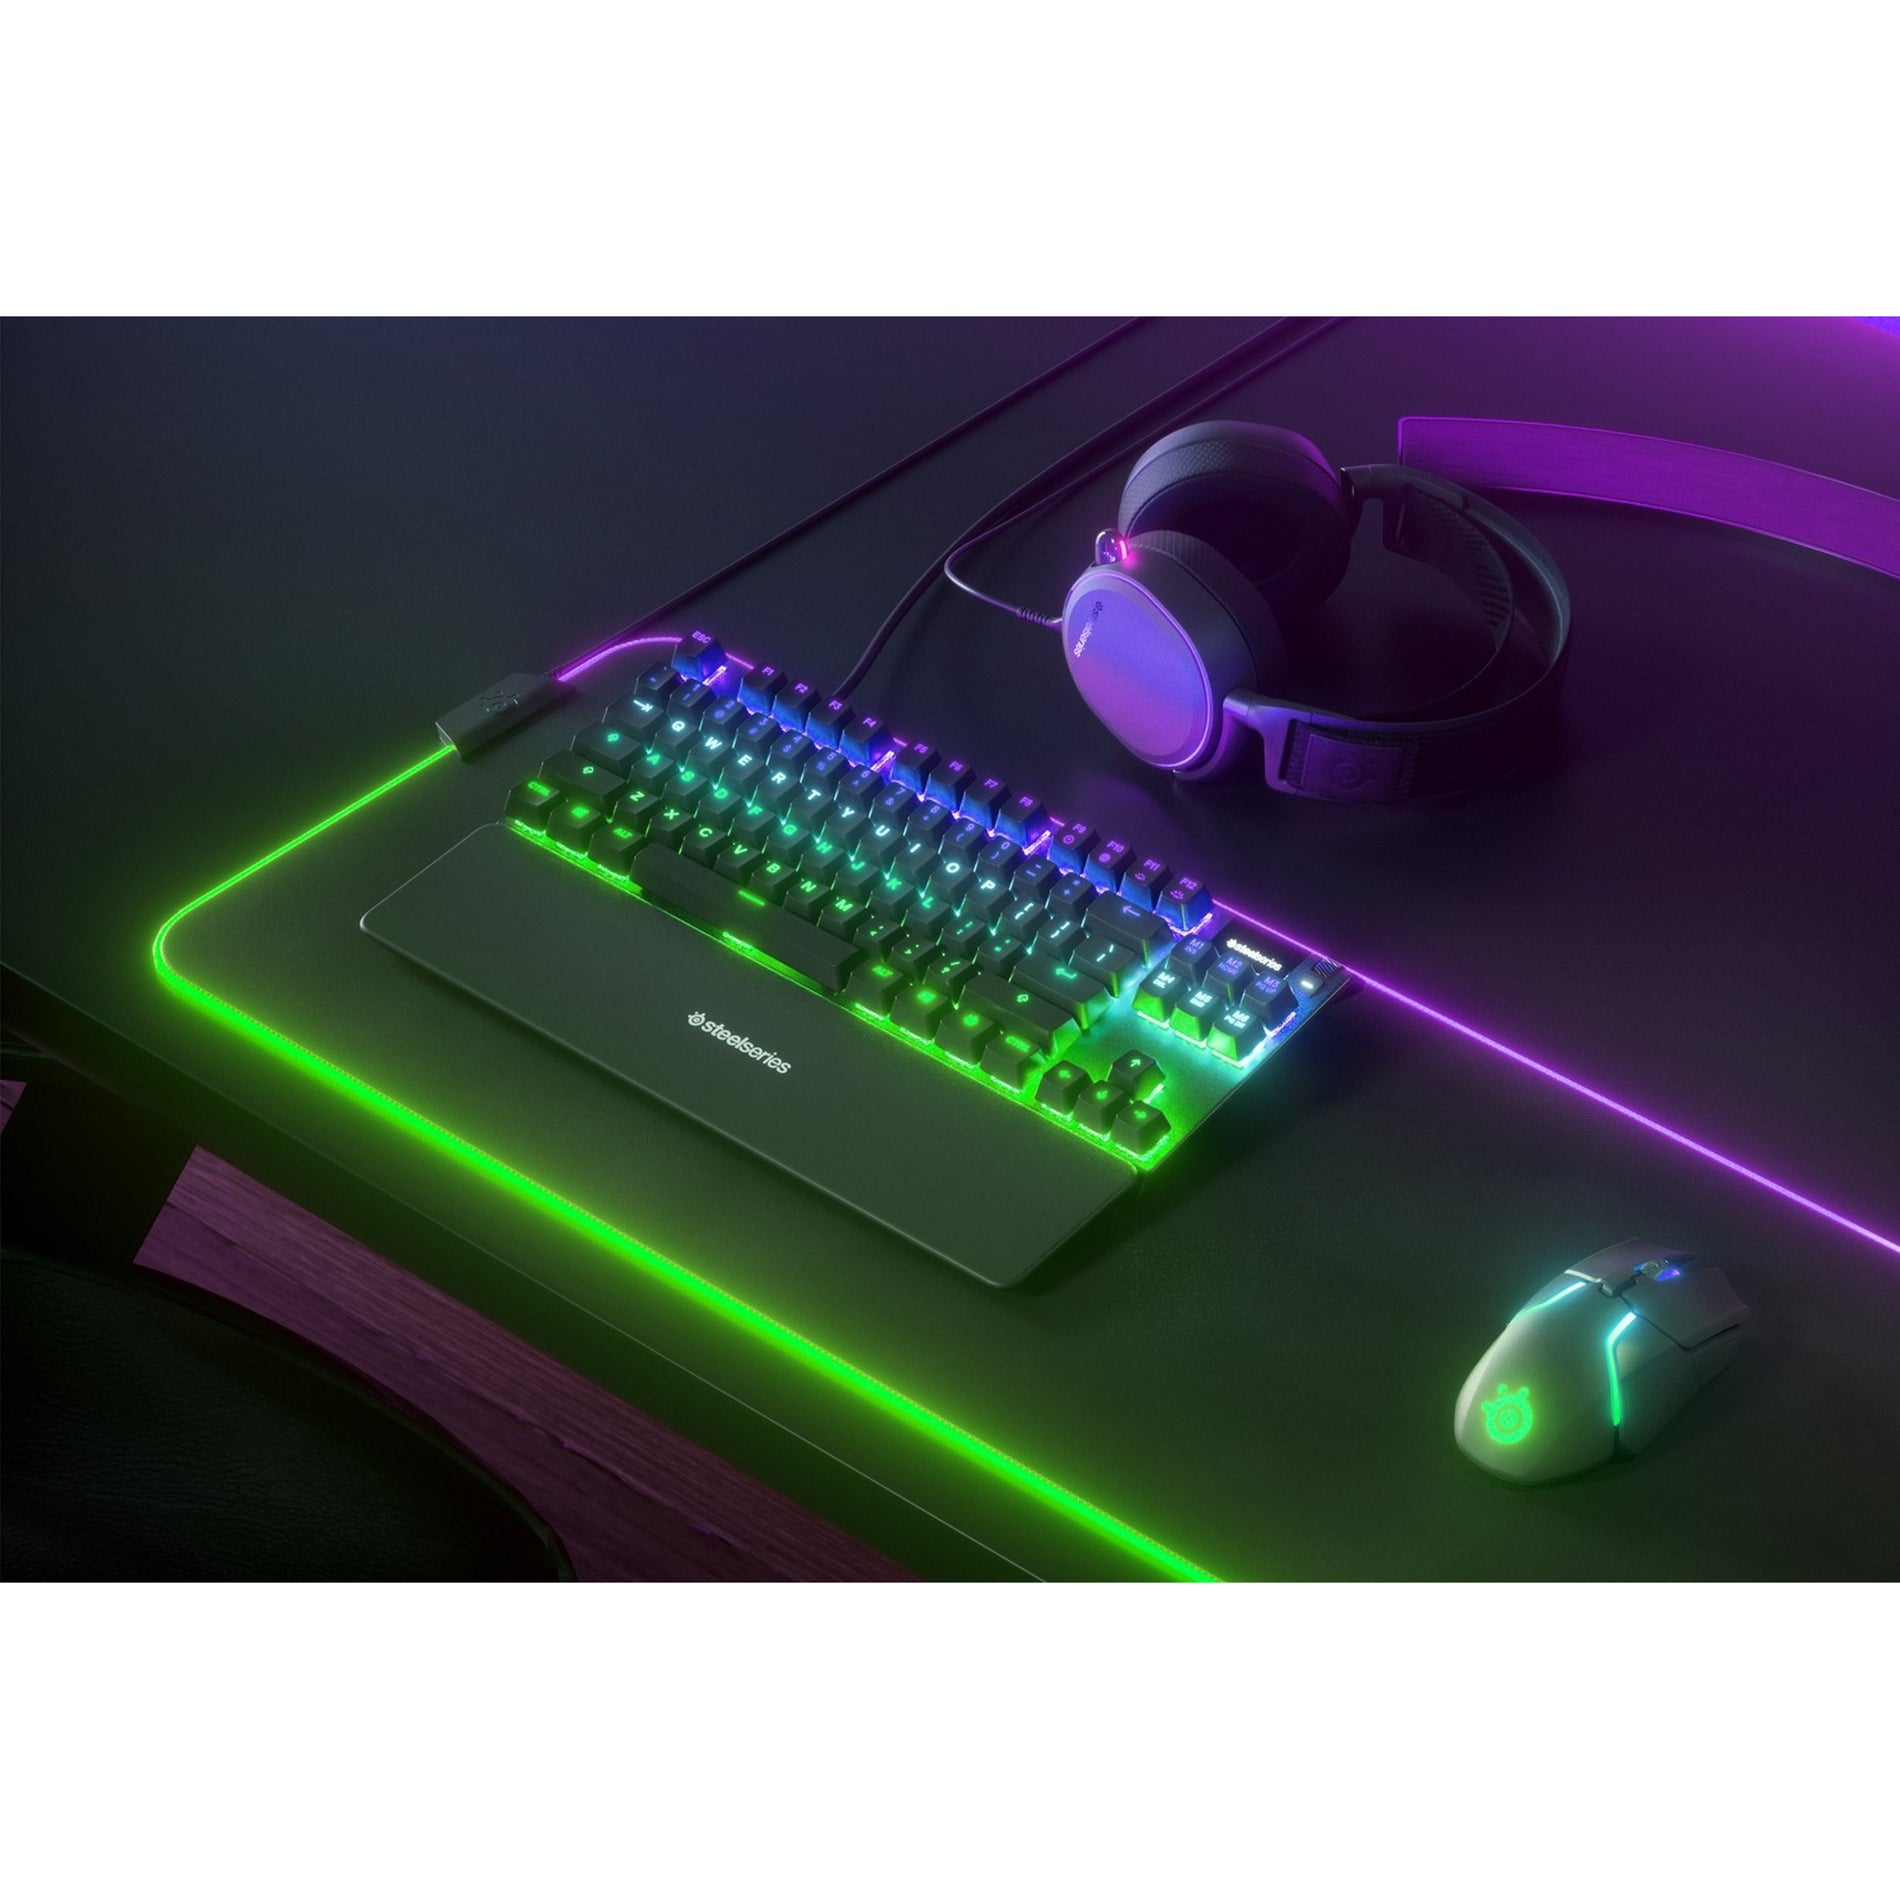 SteelSeries Apex PRO TKL Keyboard - Mechanical Keyswitch Technology, USB Connectivity [Discontinued]